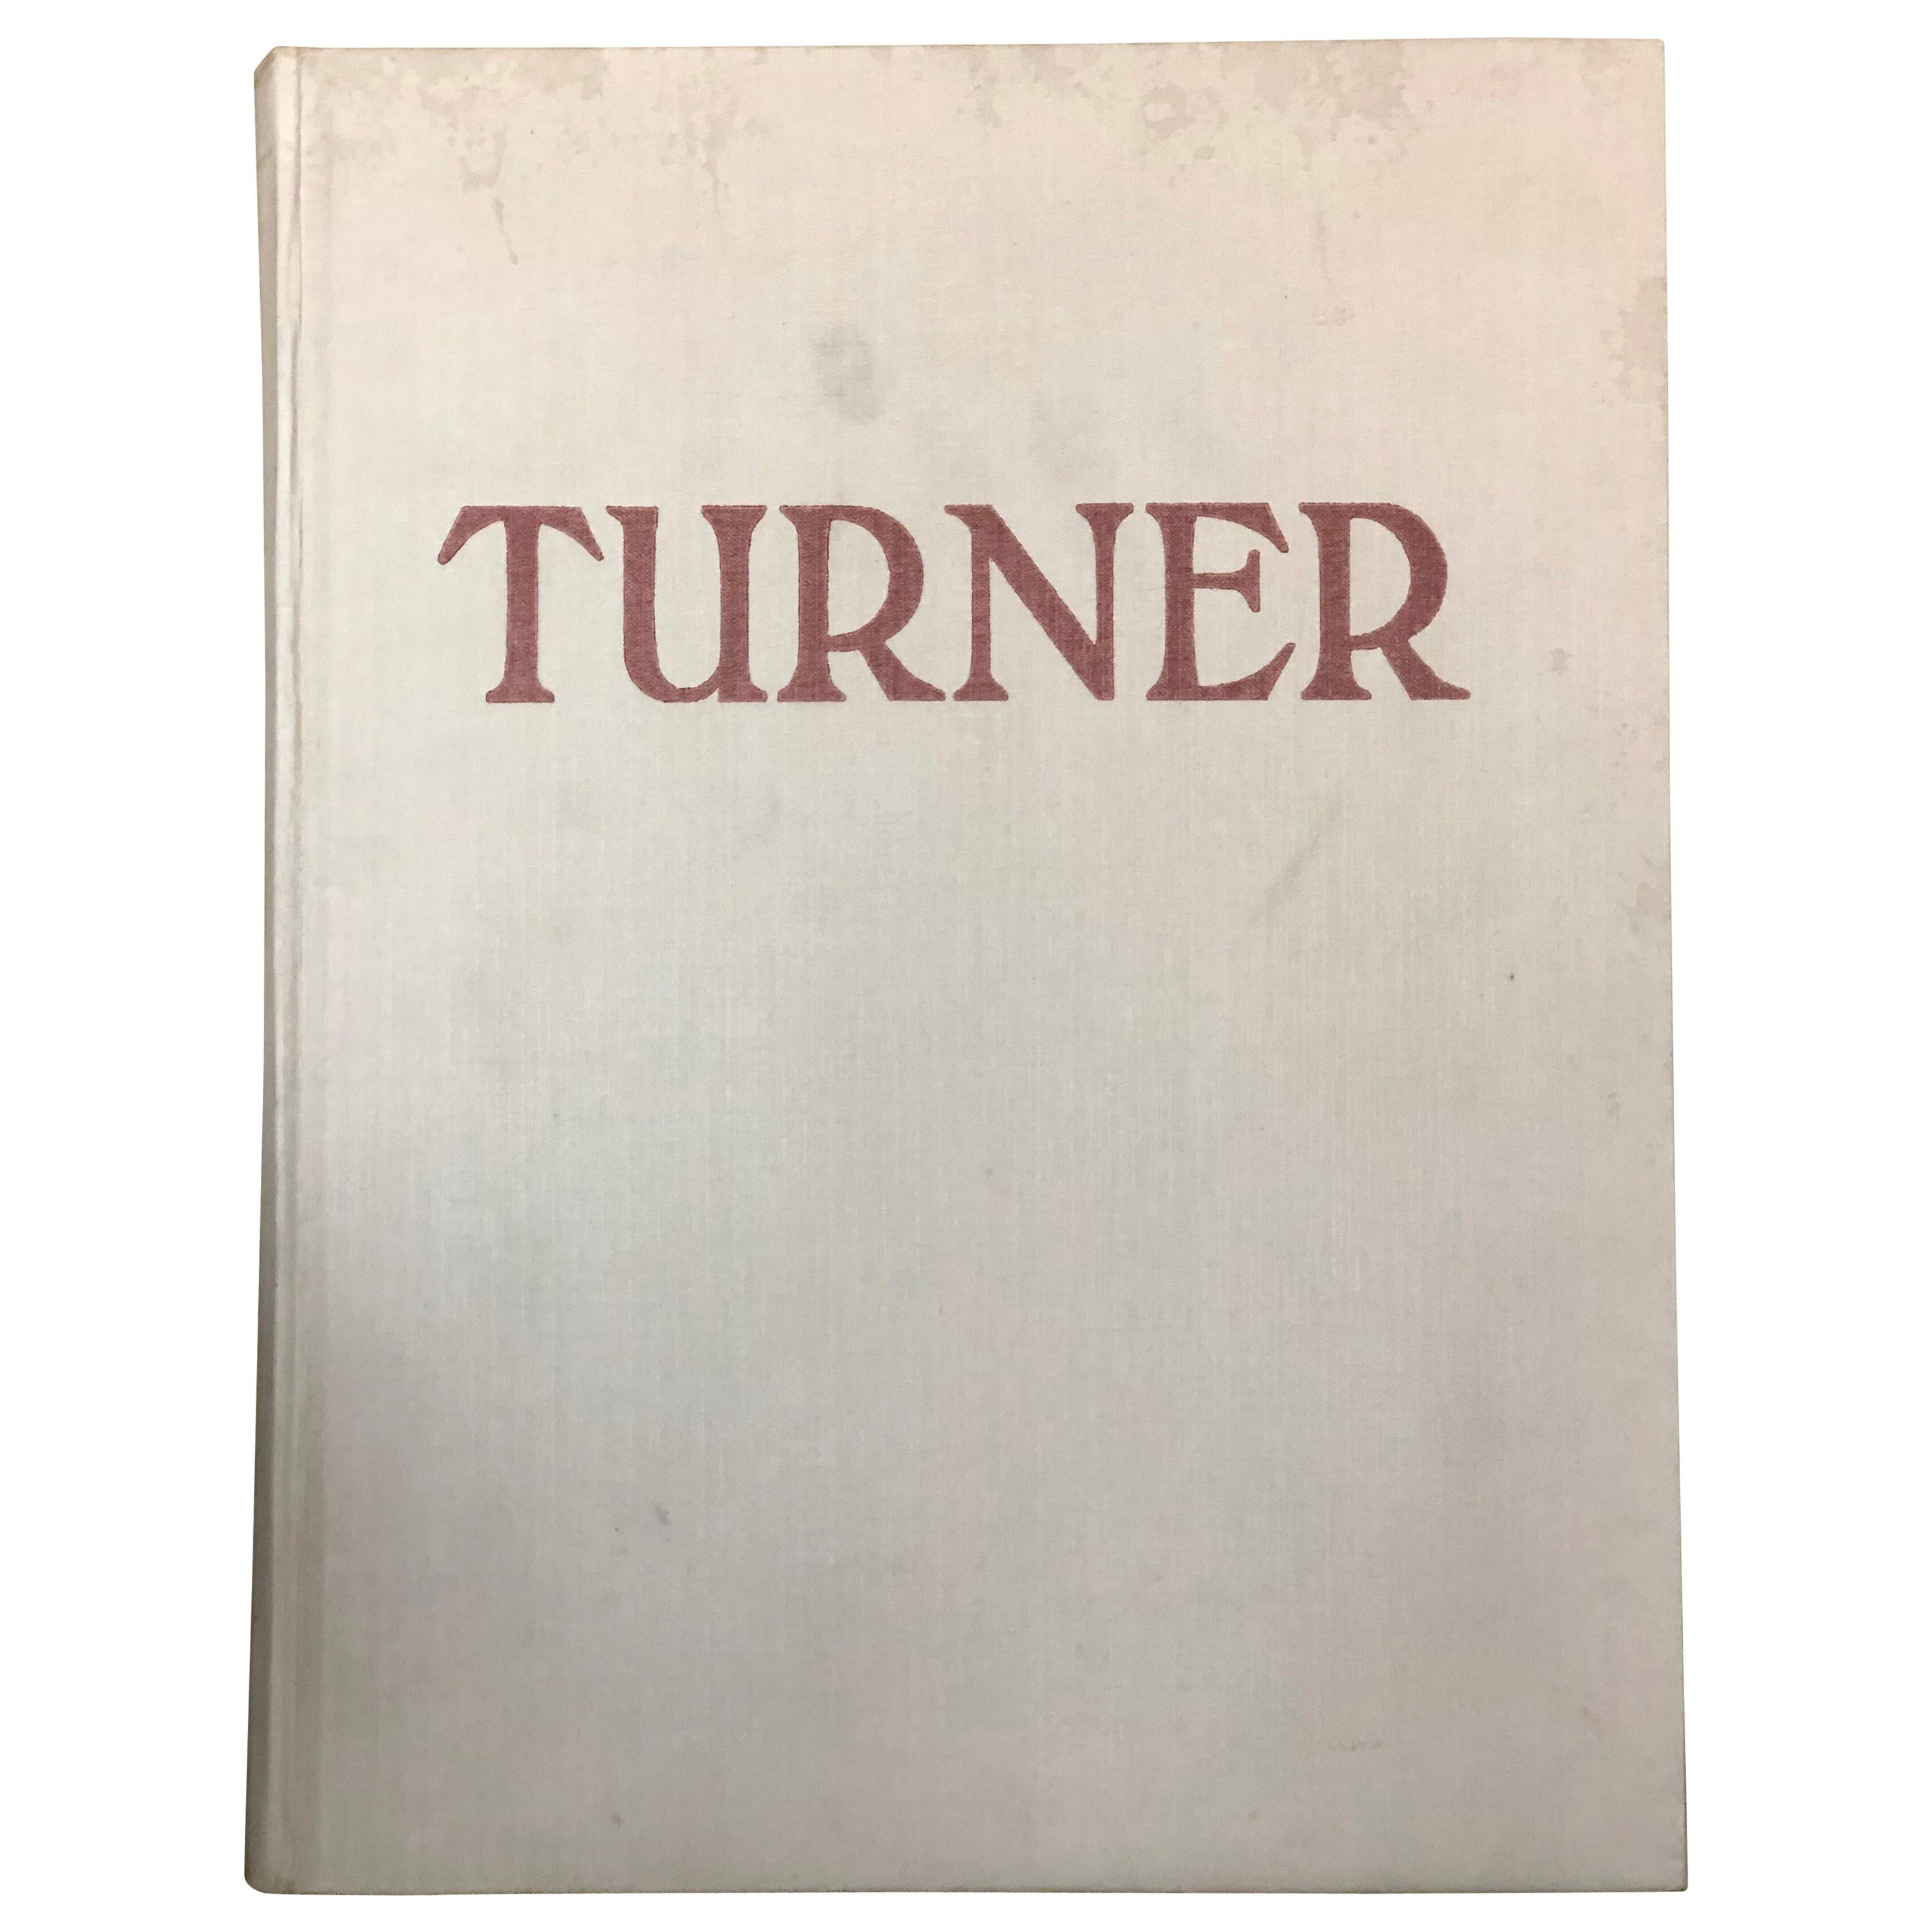 Turner by Camille Mauclair, Color Plates Printed, Photogravure, Paris, 1939 SALE